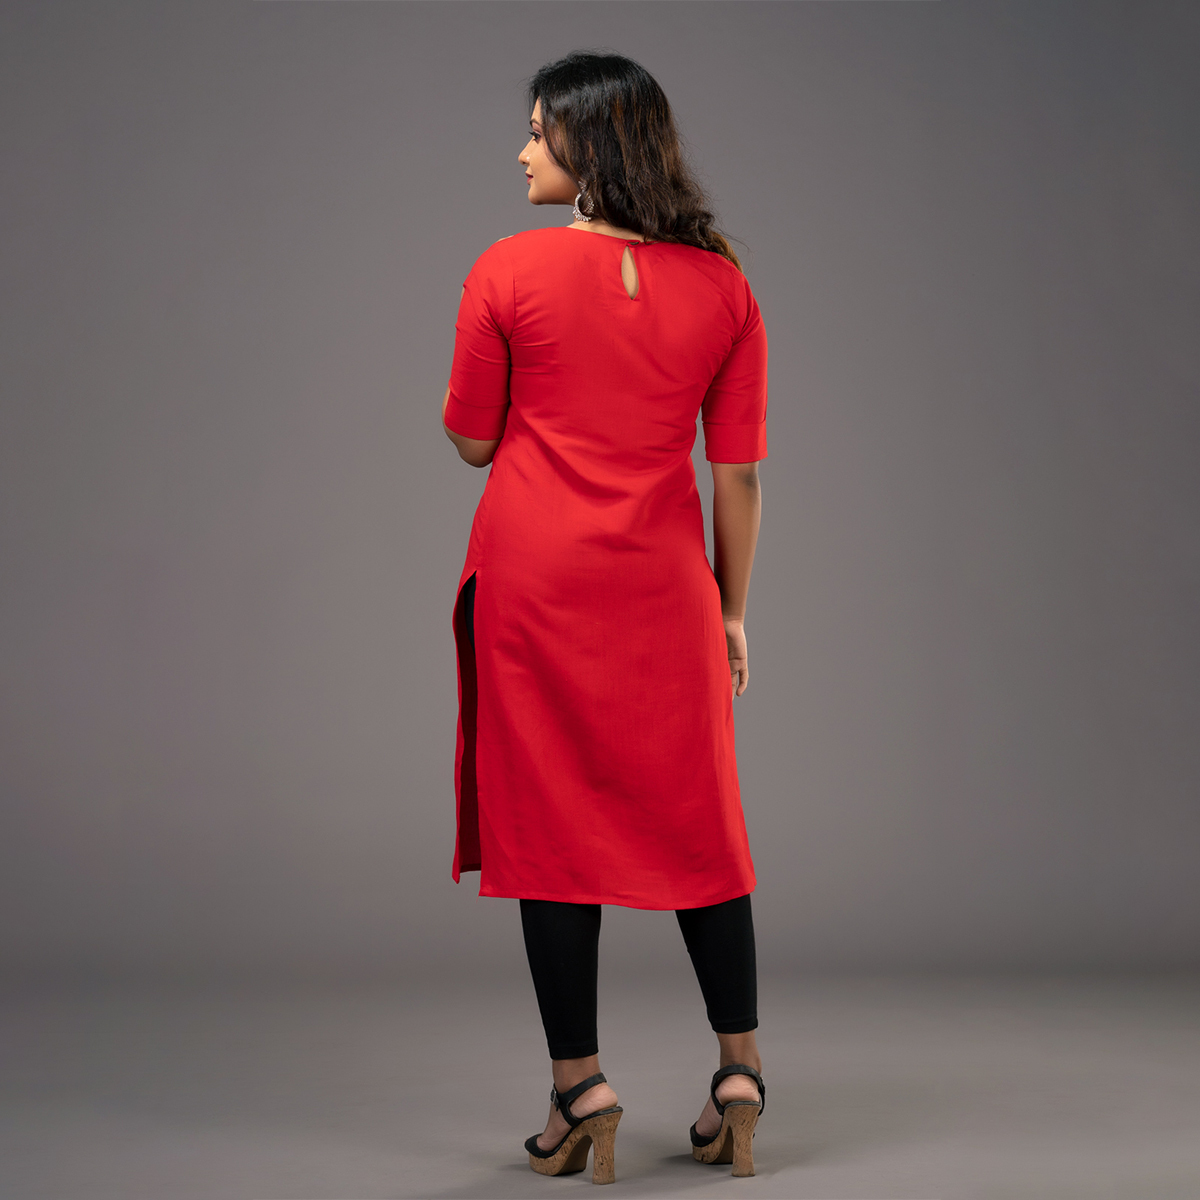 Zella Solid Color Side Slitted Straight Cut Kurta with Pin Tucked Yoke & Keyhole Back Neck - Red